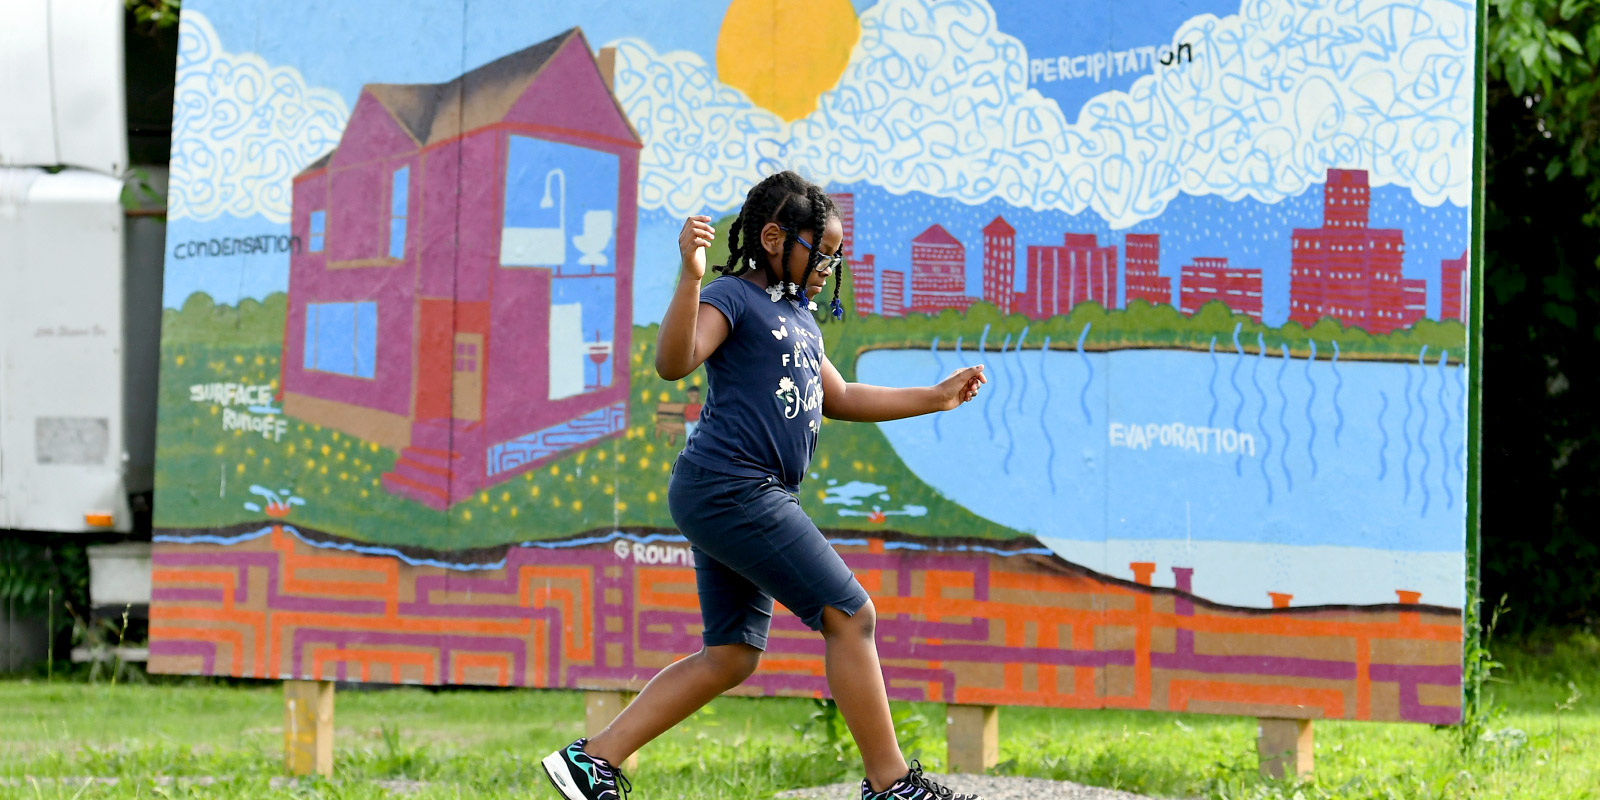 A young girl skips over a tree trunk with a mural of a red house next to a pond with buildings in the background.